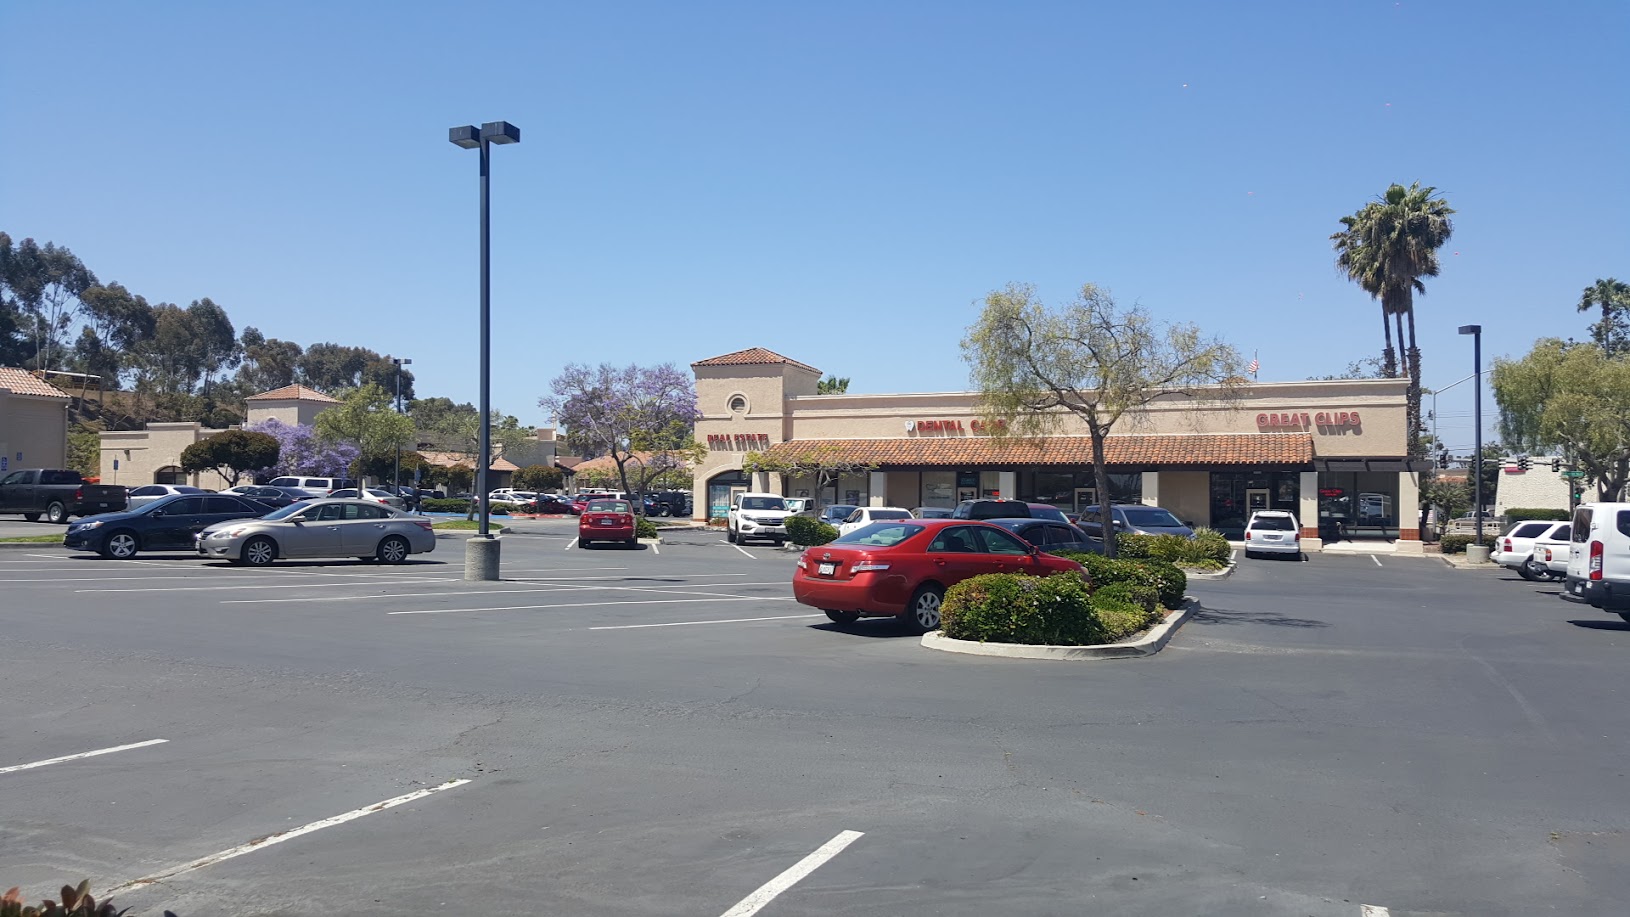 Mission Plaza Real Shopping Center